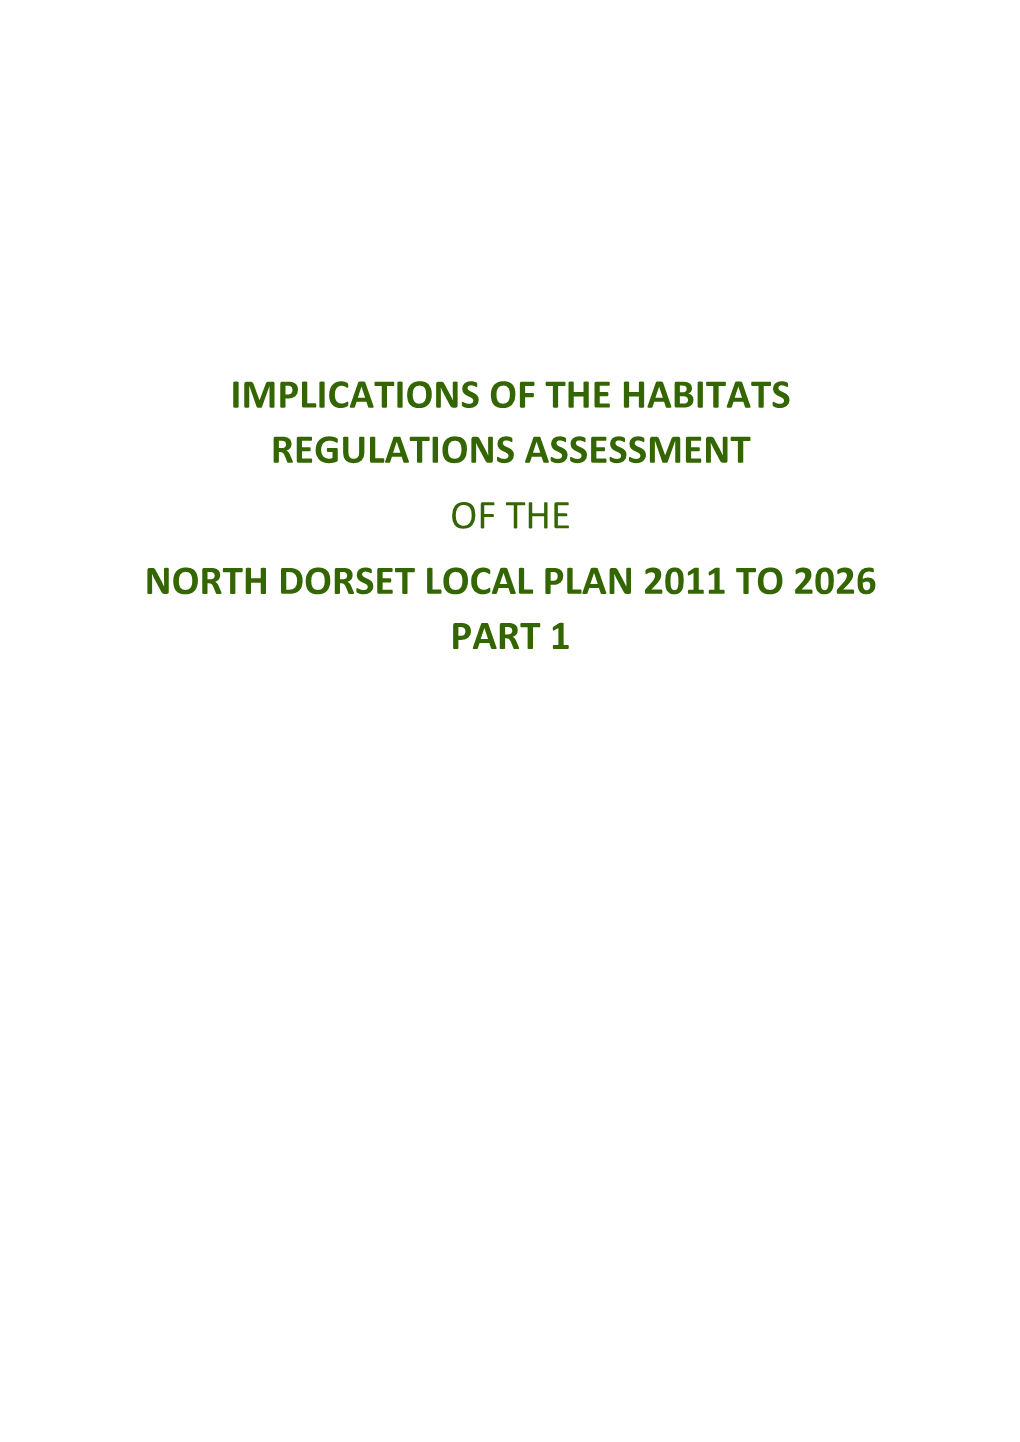 Implications of the Habitats Regulations Assessment of the North Dorset Local Plan 2011 to 2026 Part 1